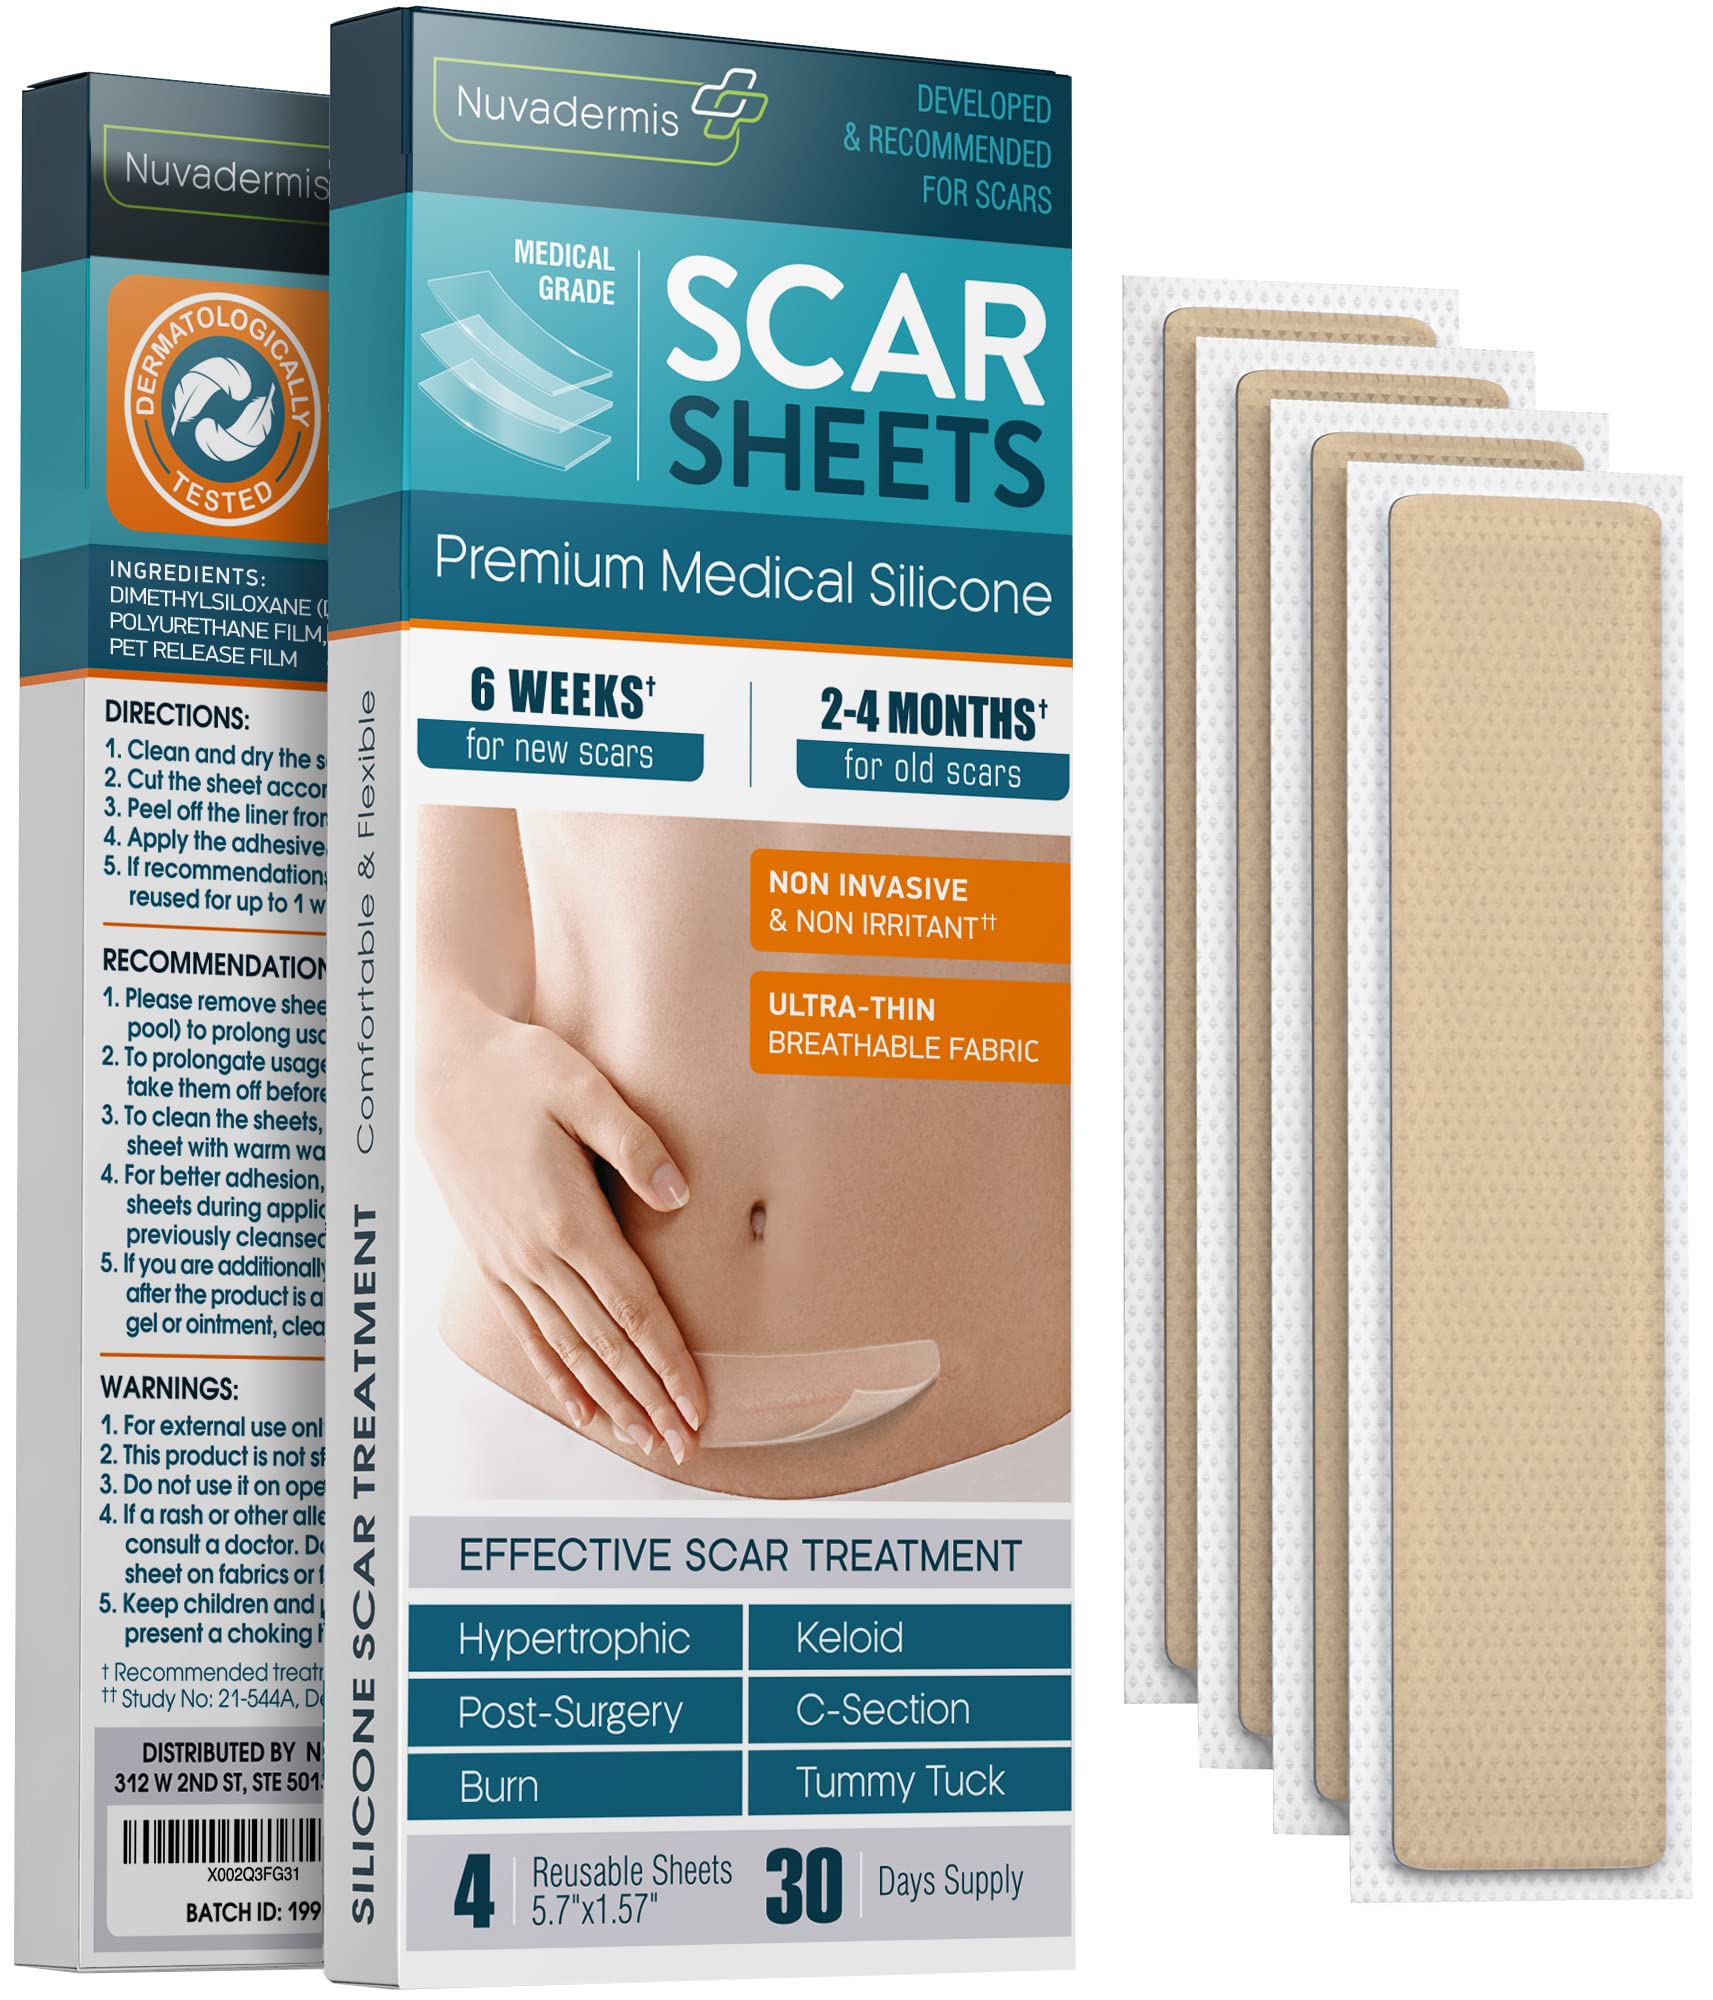 NUVADERMIS Silicone Scar Sheets - Extra Long Scar Sheets for C-Section, Tummy Tuck, Keloid, and Surgical Scars - Reusable Medical Grade Silicone Scar Sheets - Post Surgery Supplies - Pack of 4